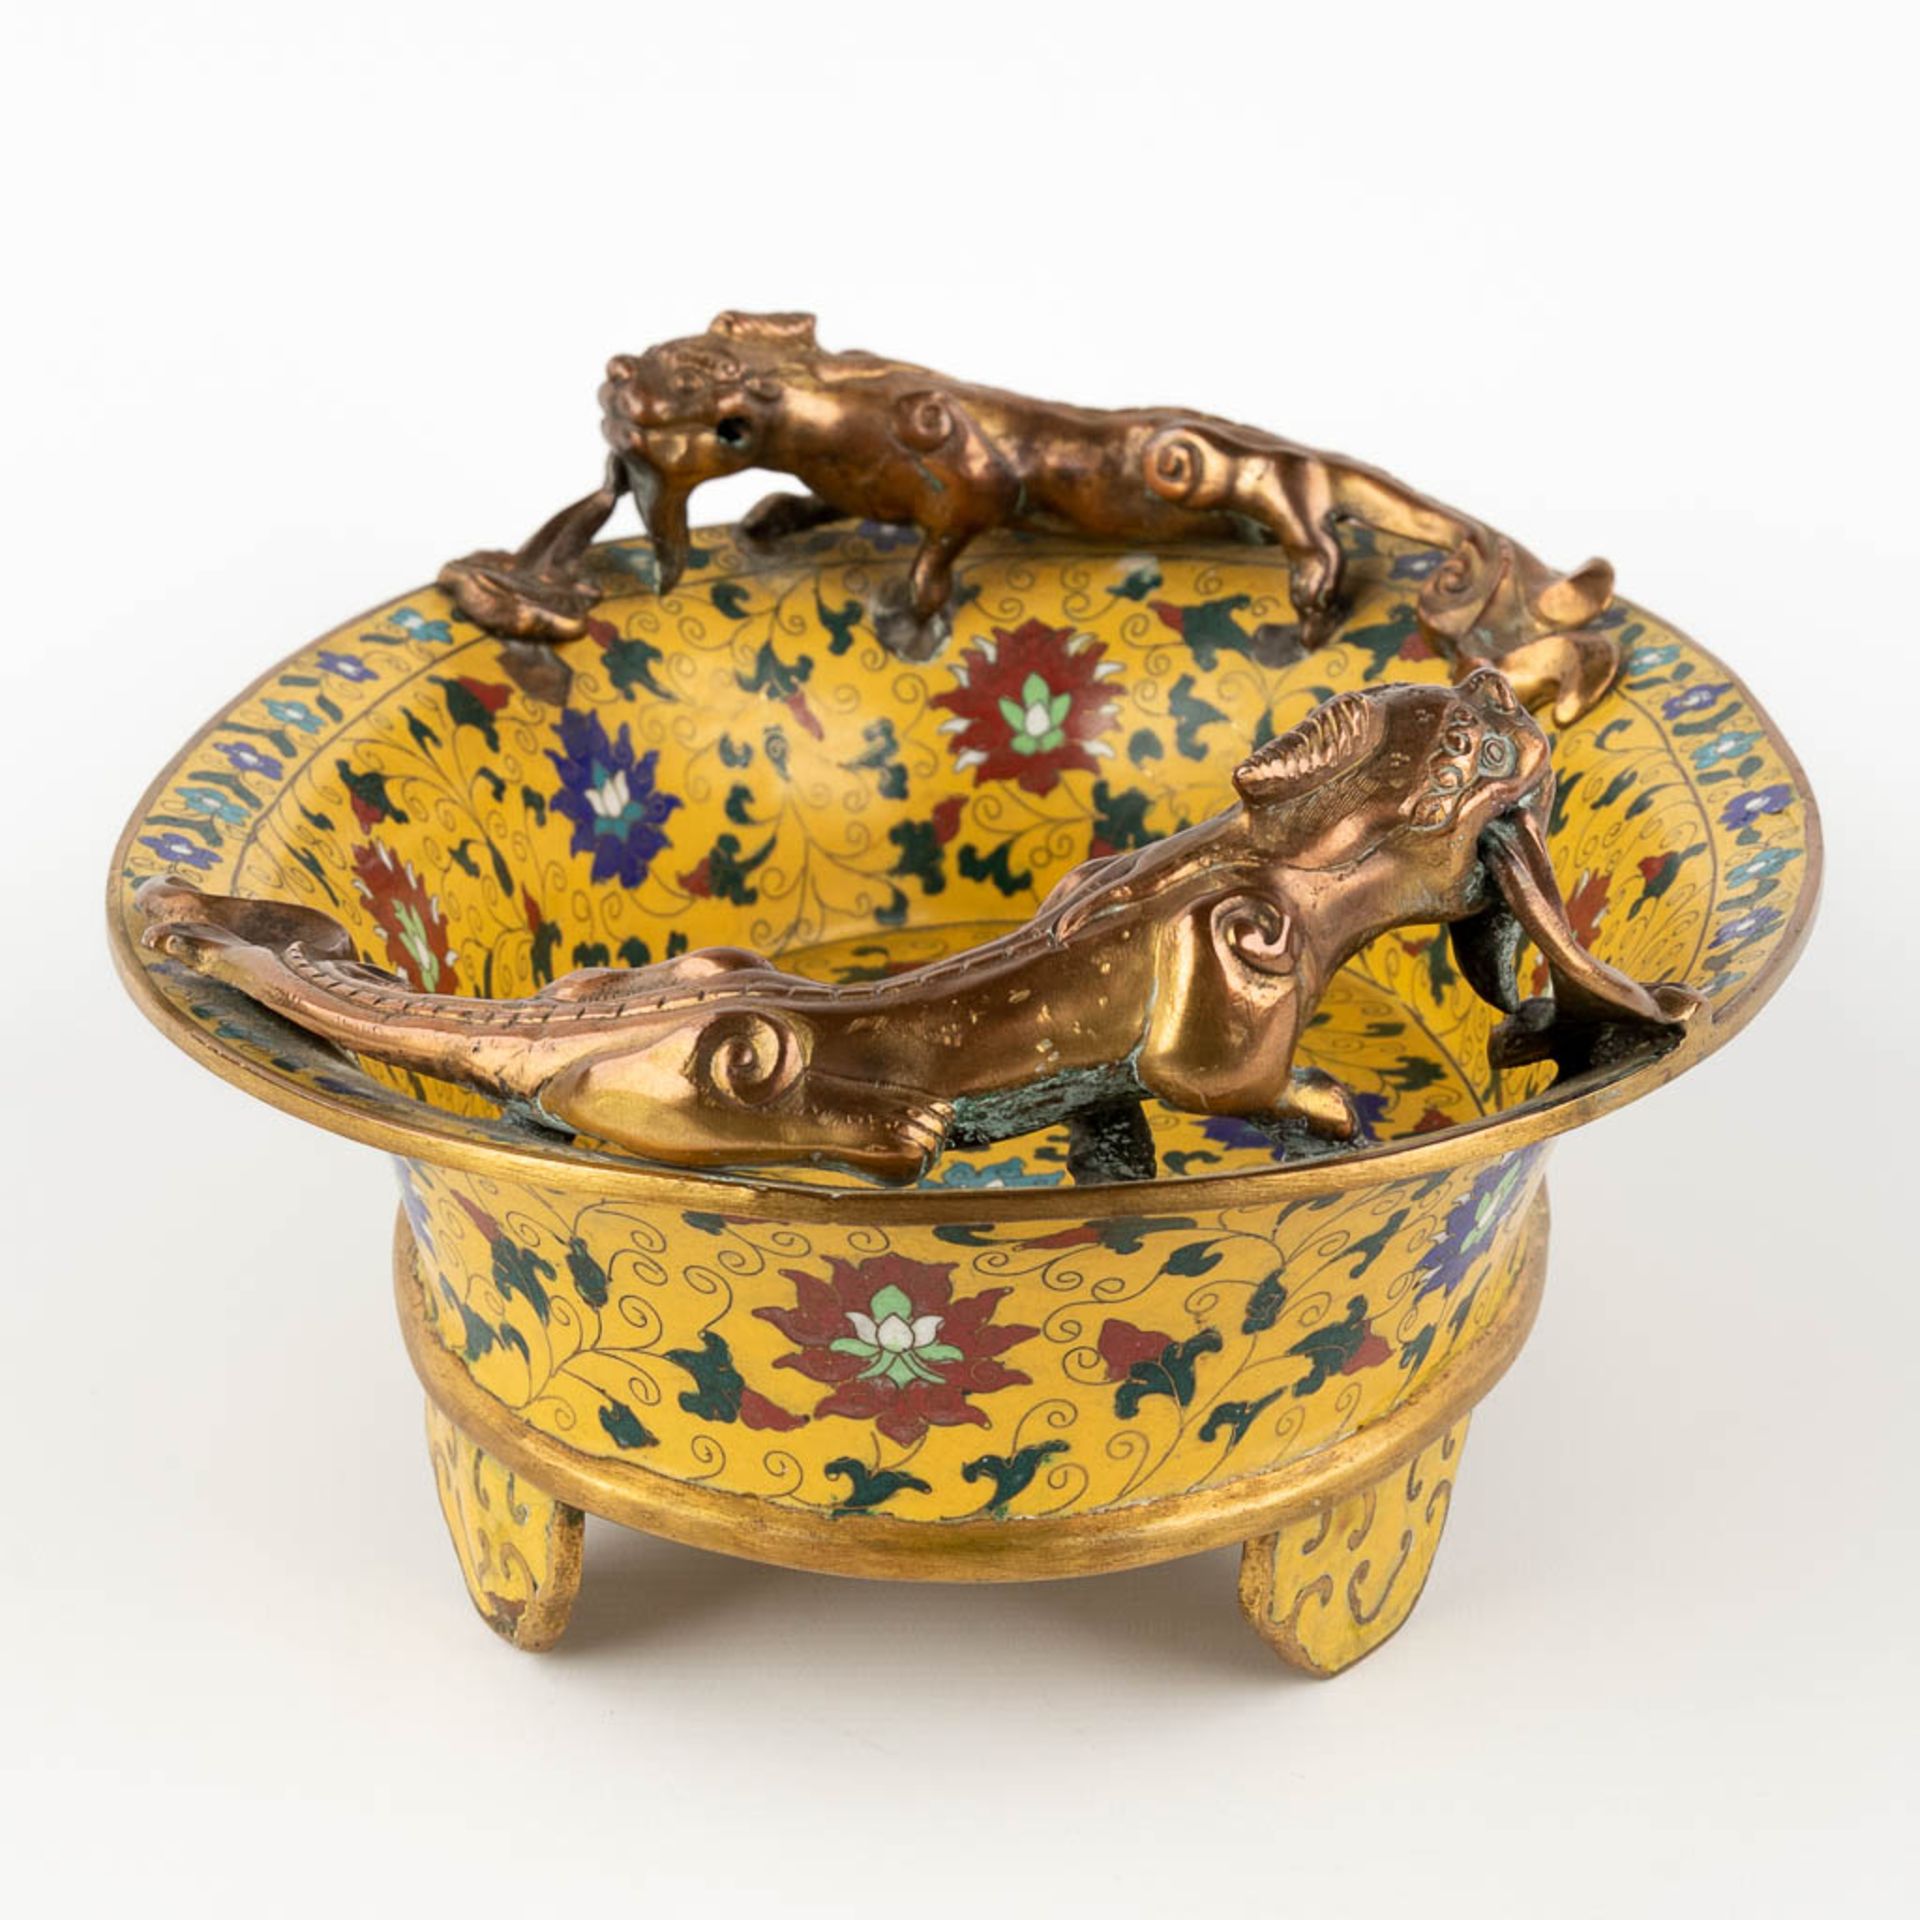 A Chinese cloisonné bronze bowl, mounted with dragons and finished with floral decor. (D:25,5 x W:36 - Image 6 of 13